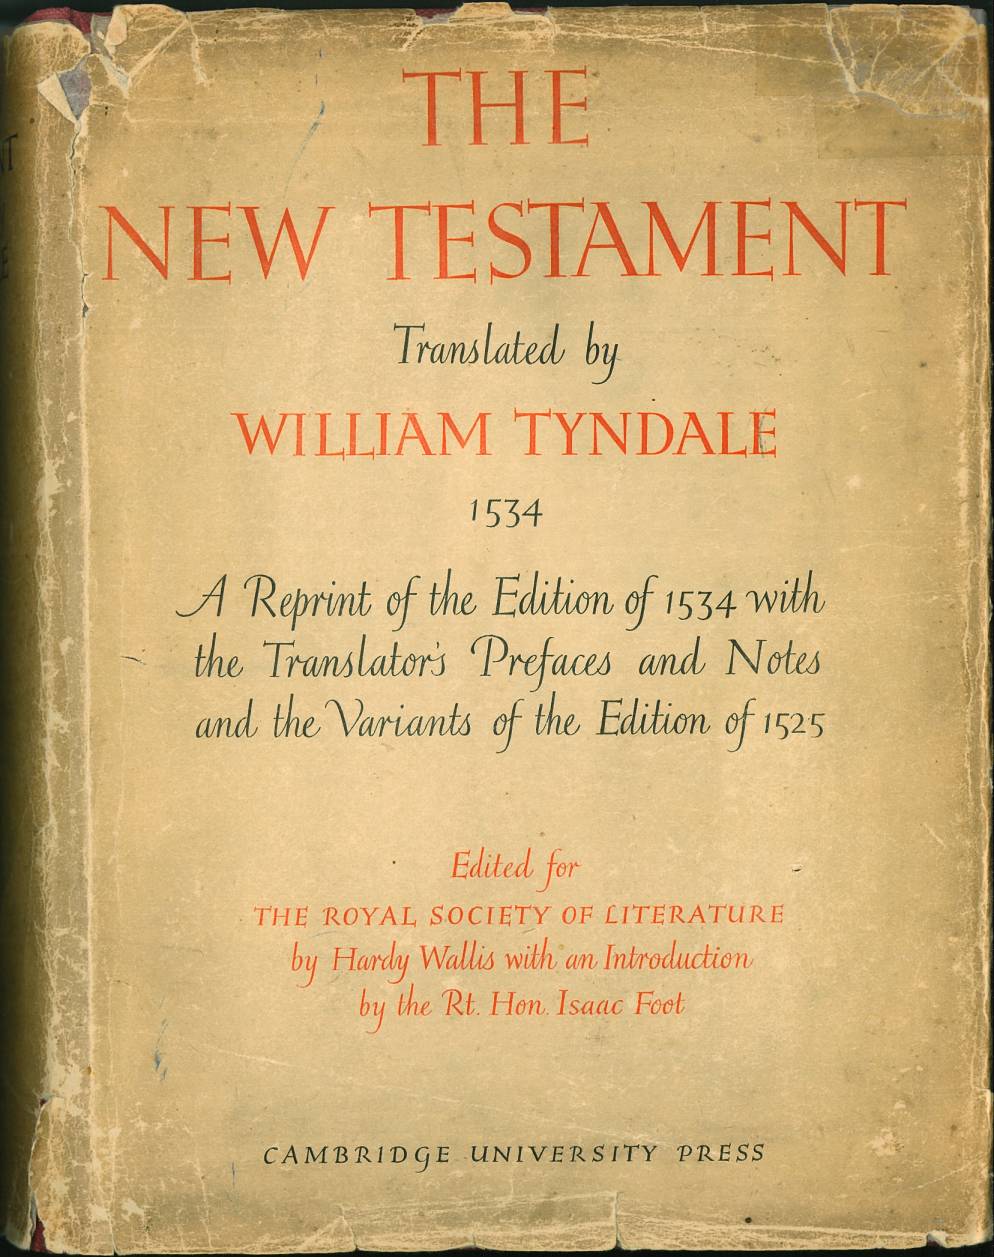 1534 printing of the Tyndale Bible